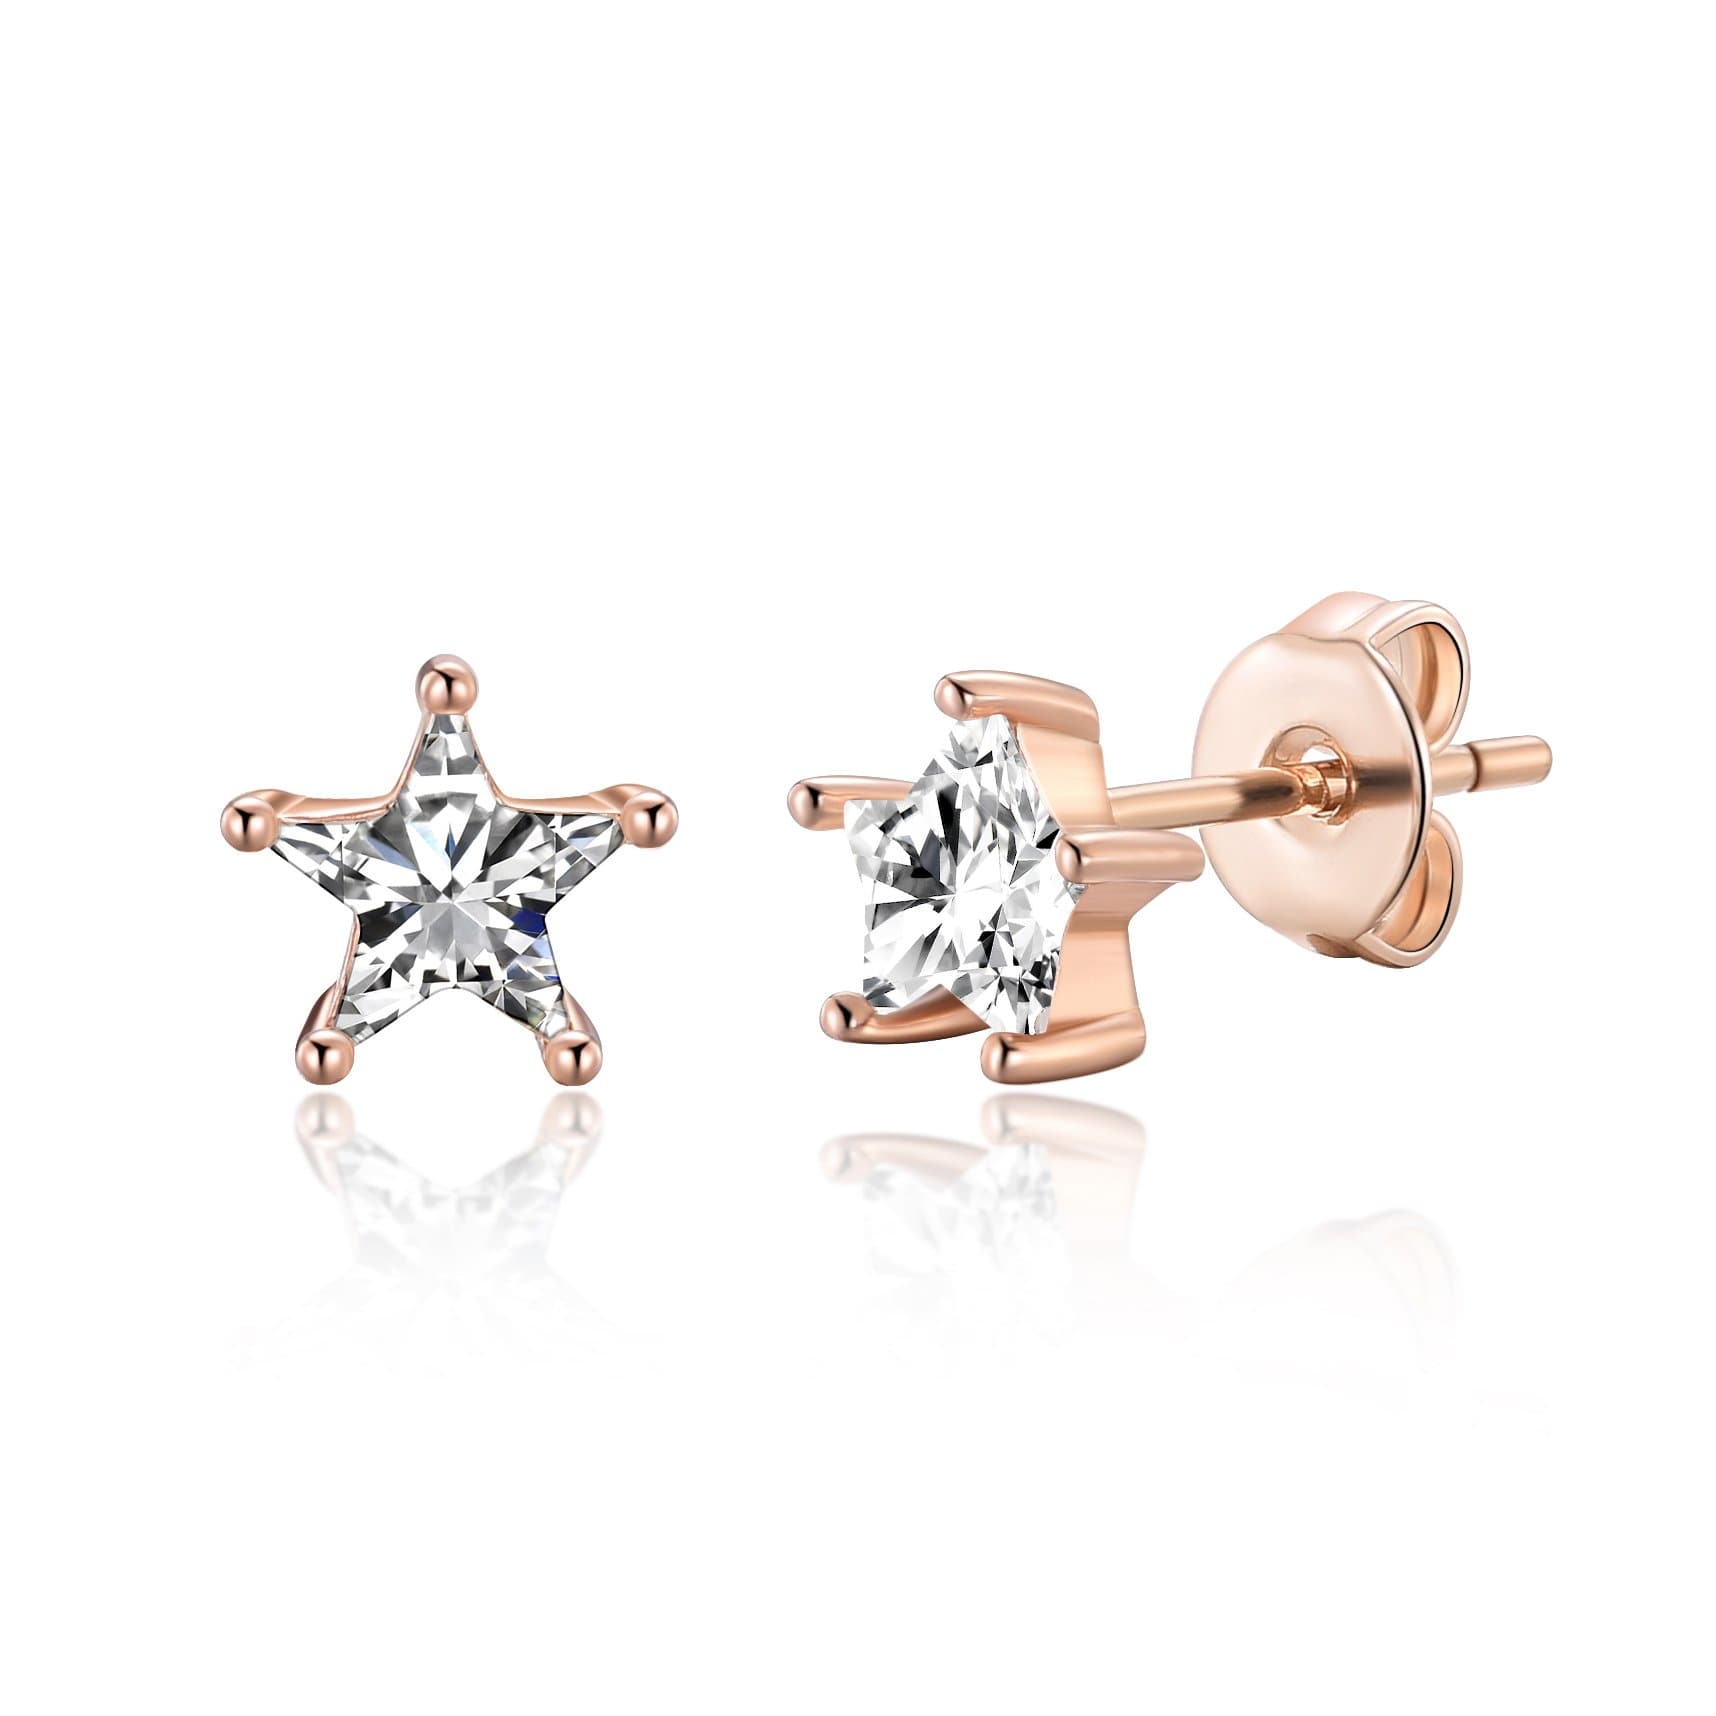 Rose Gold Plated Star Earrings Created with Zircondia® Crystals by Philip Jones Jewellery